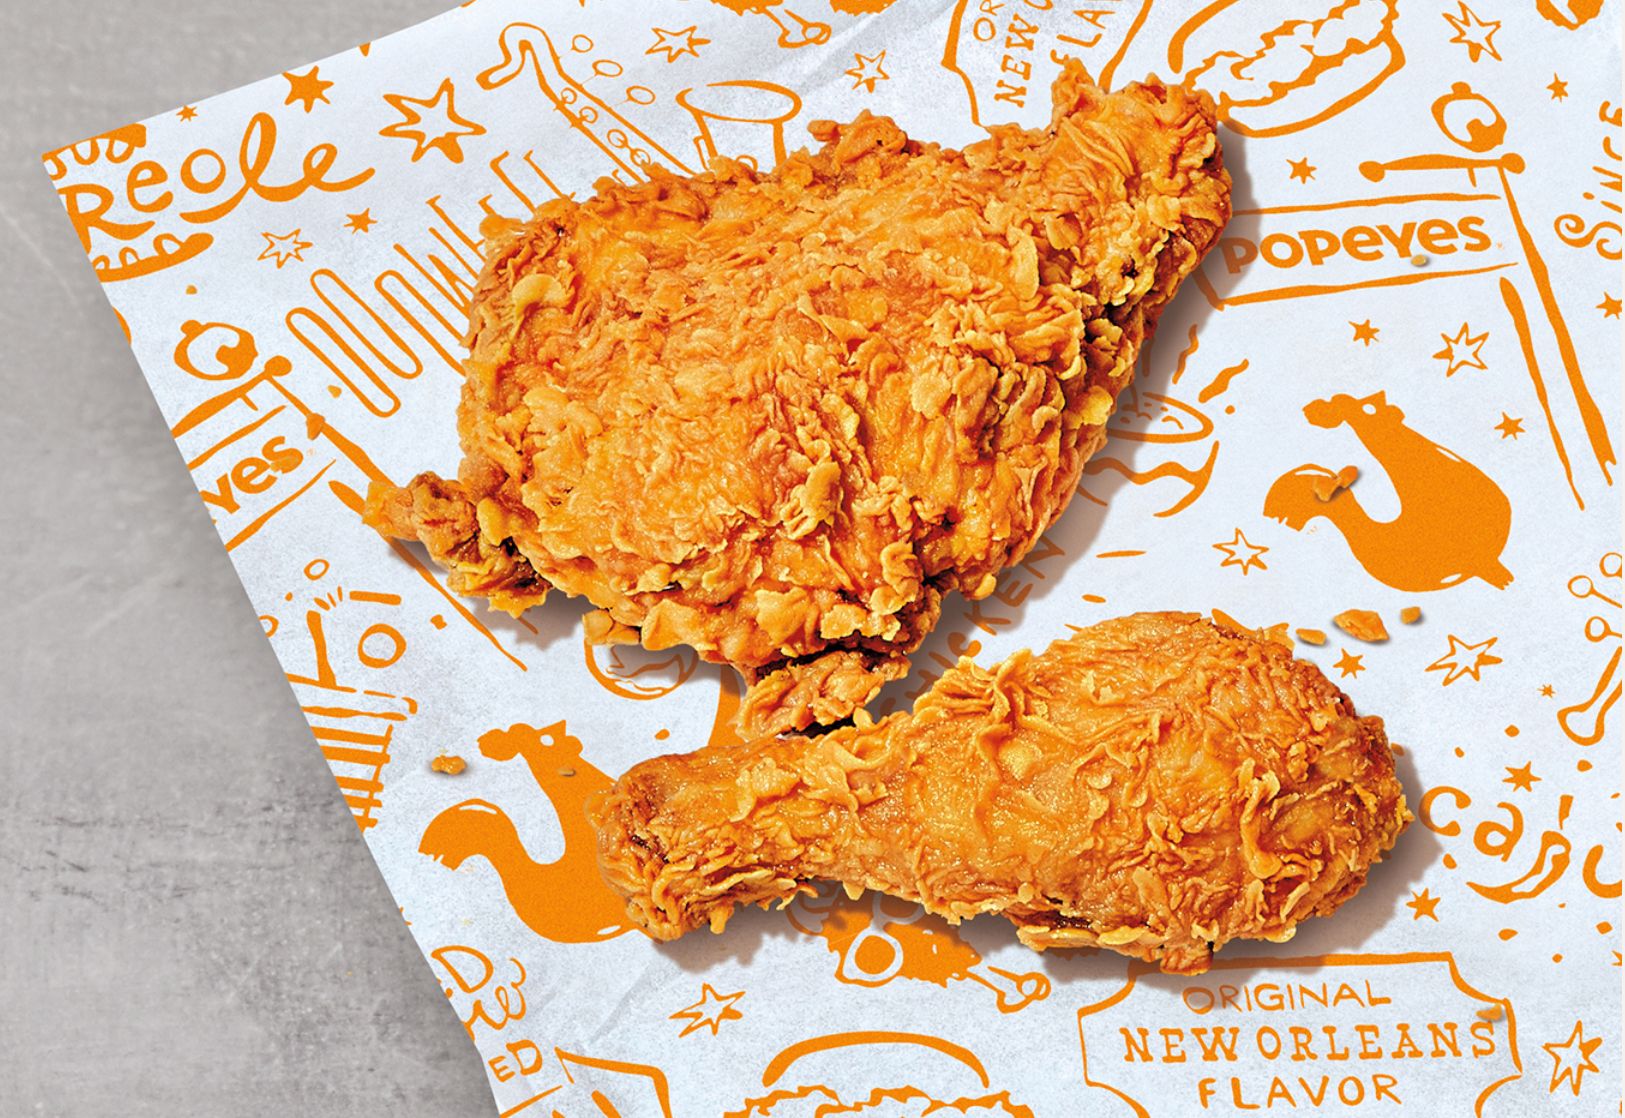 Get 2 Pieces of Popeyes' Classic Bone In Chicken for Free with Your First $10+ Digital Order for a Limited Time